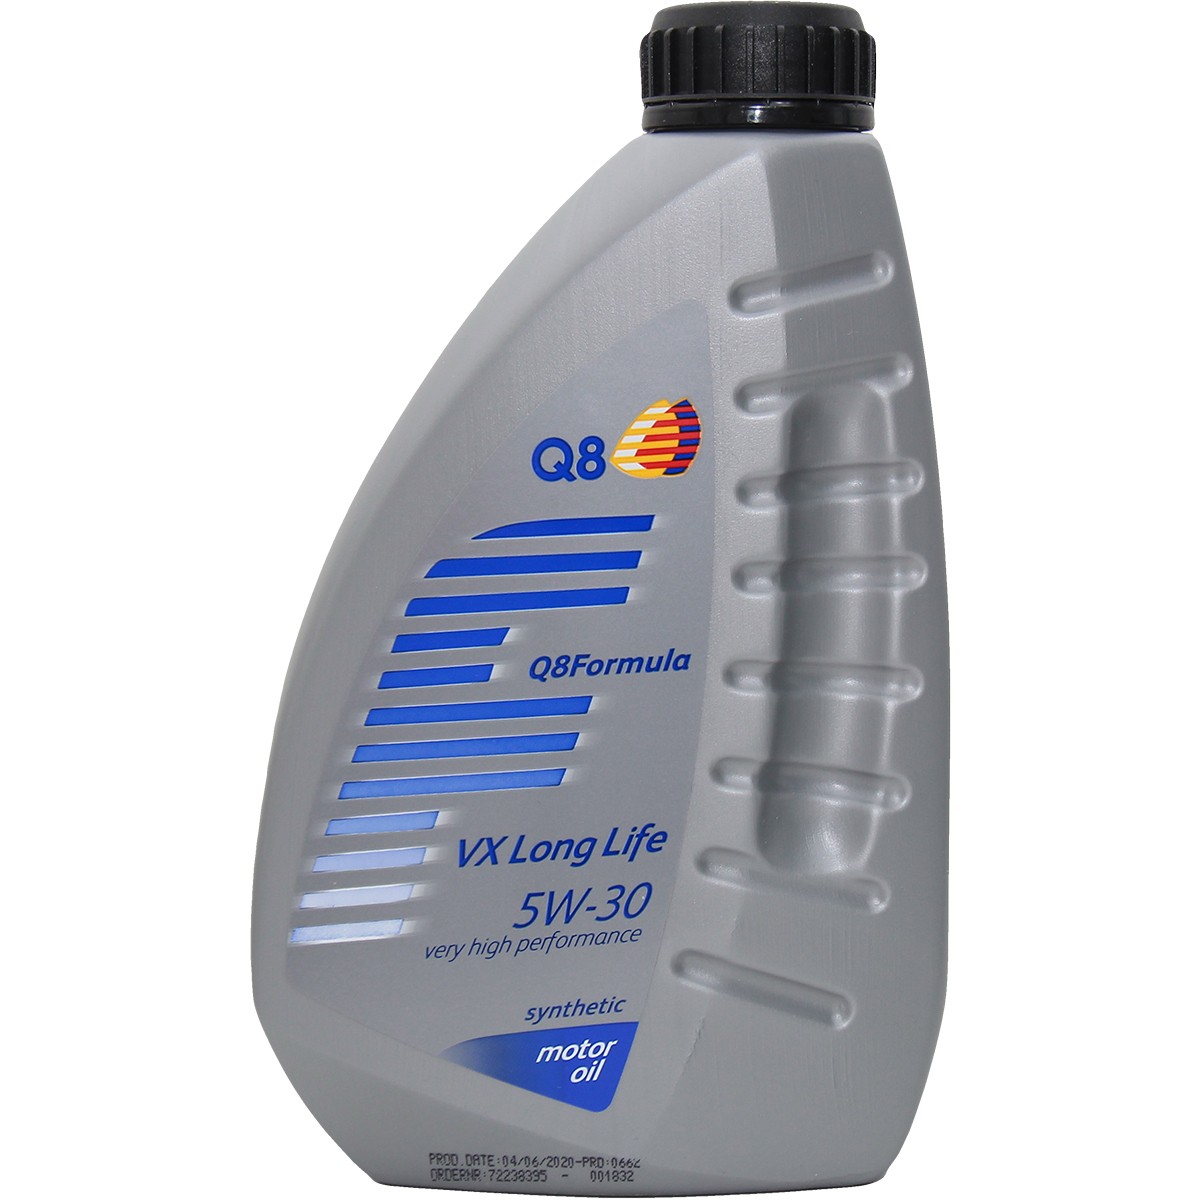 Engine oil Q8Oils 5W-30, 1l, Synthetic Oil longlife 101108401751